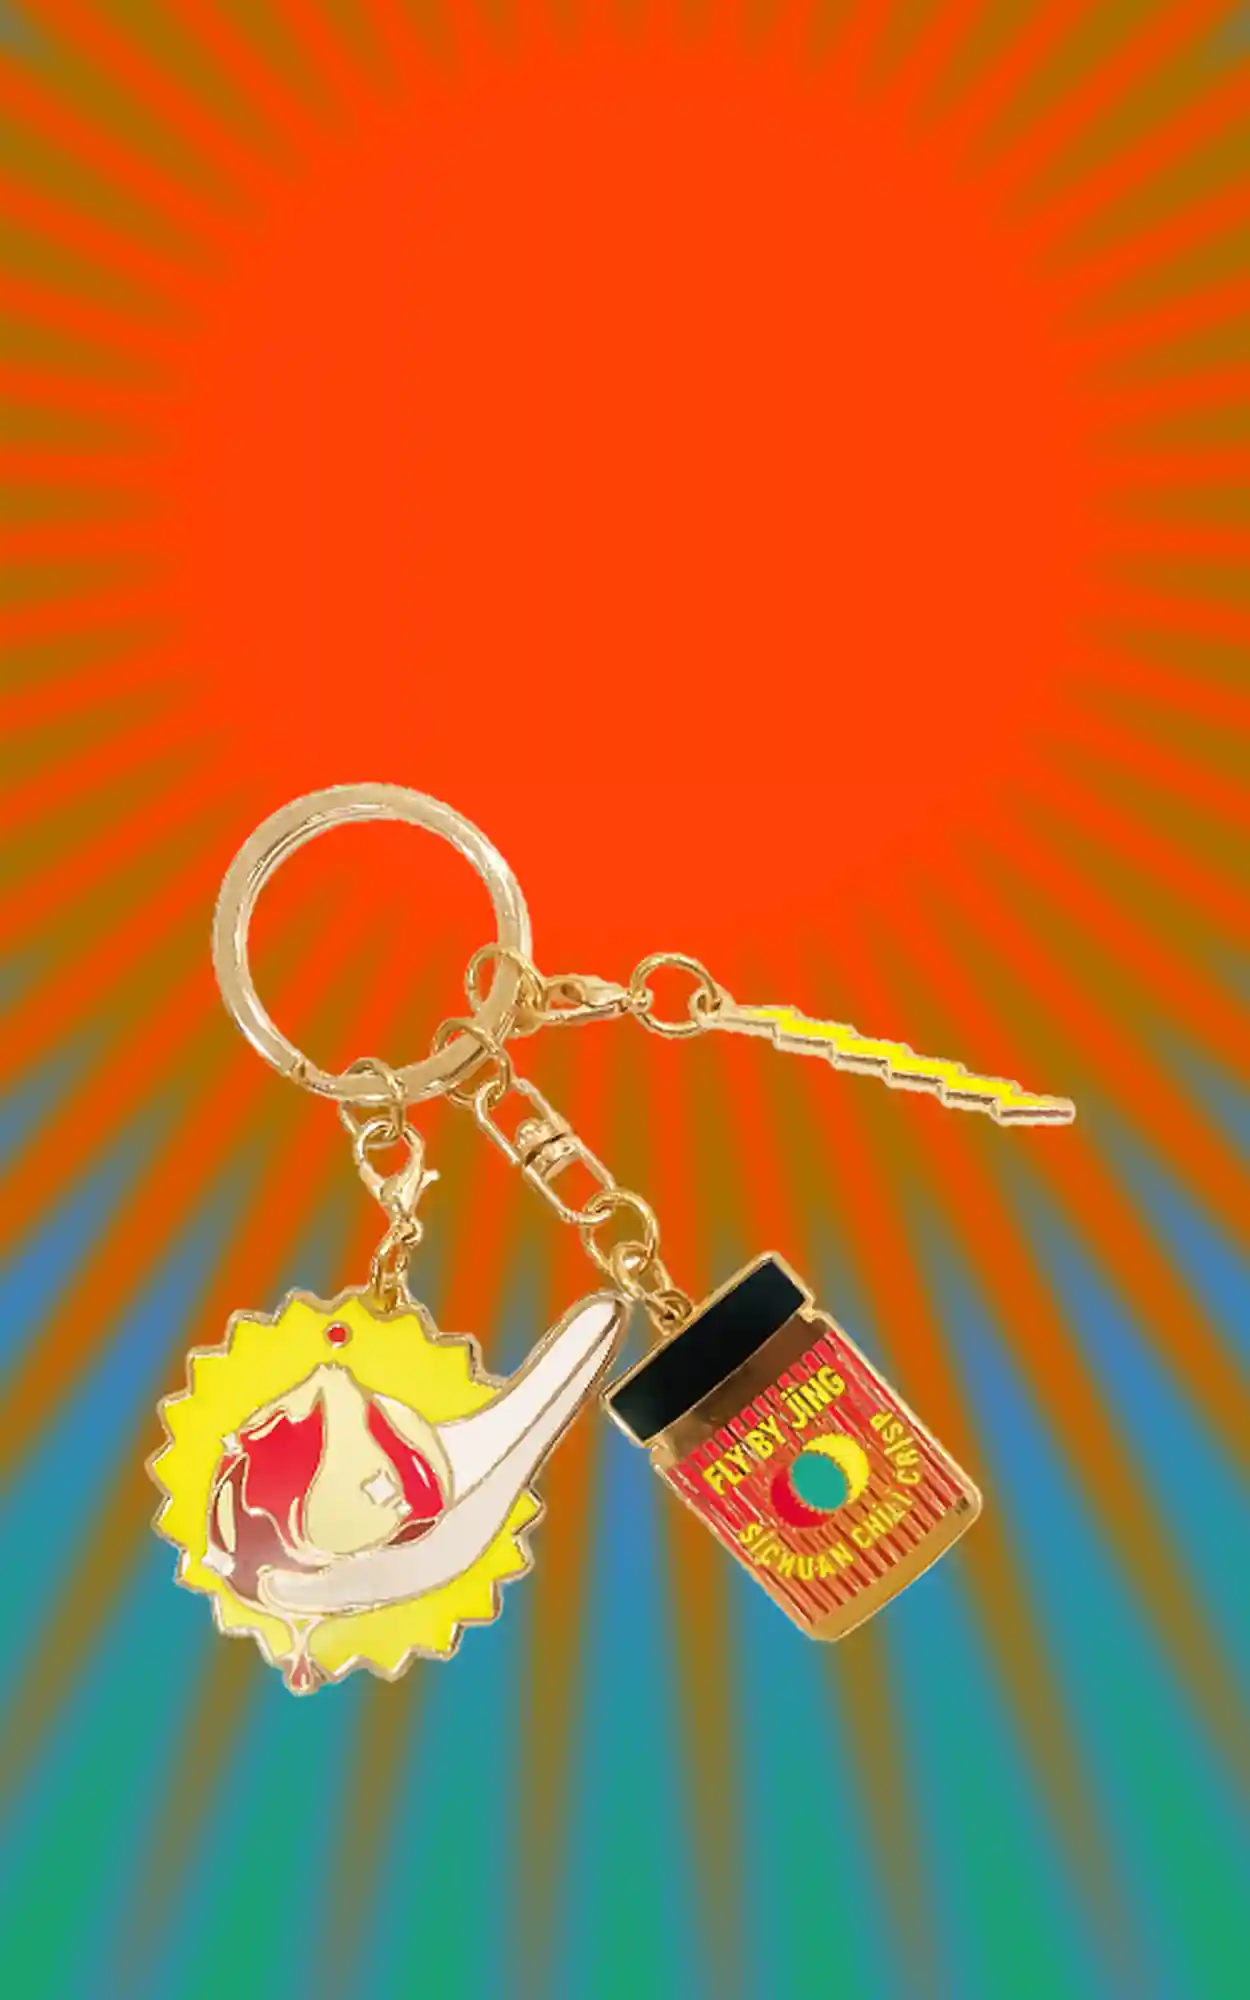 Fly By Jing x Pintrill Chili Crisp keychain with tie dye effect in the background